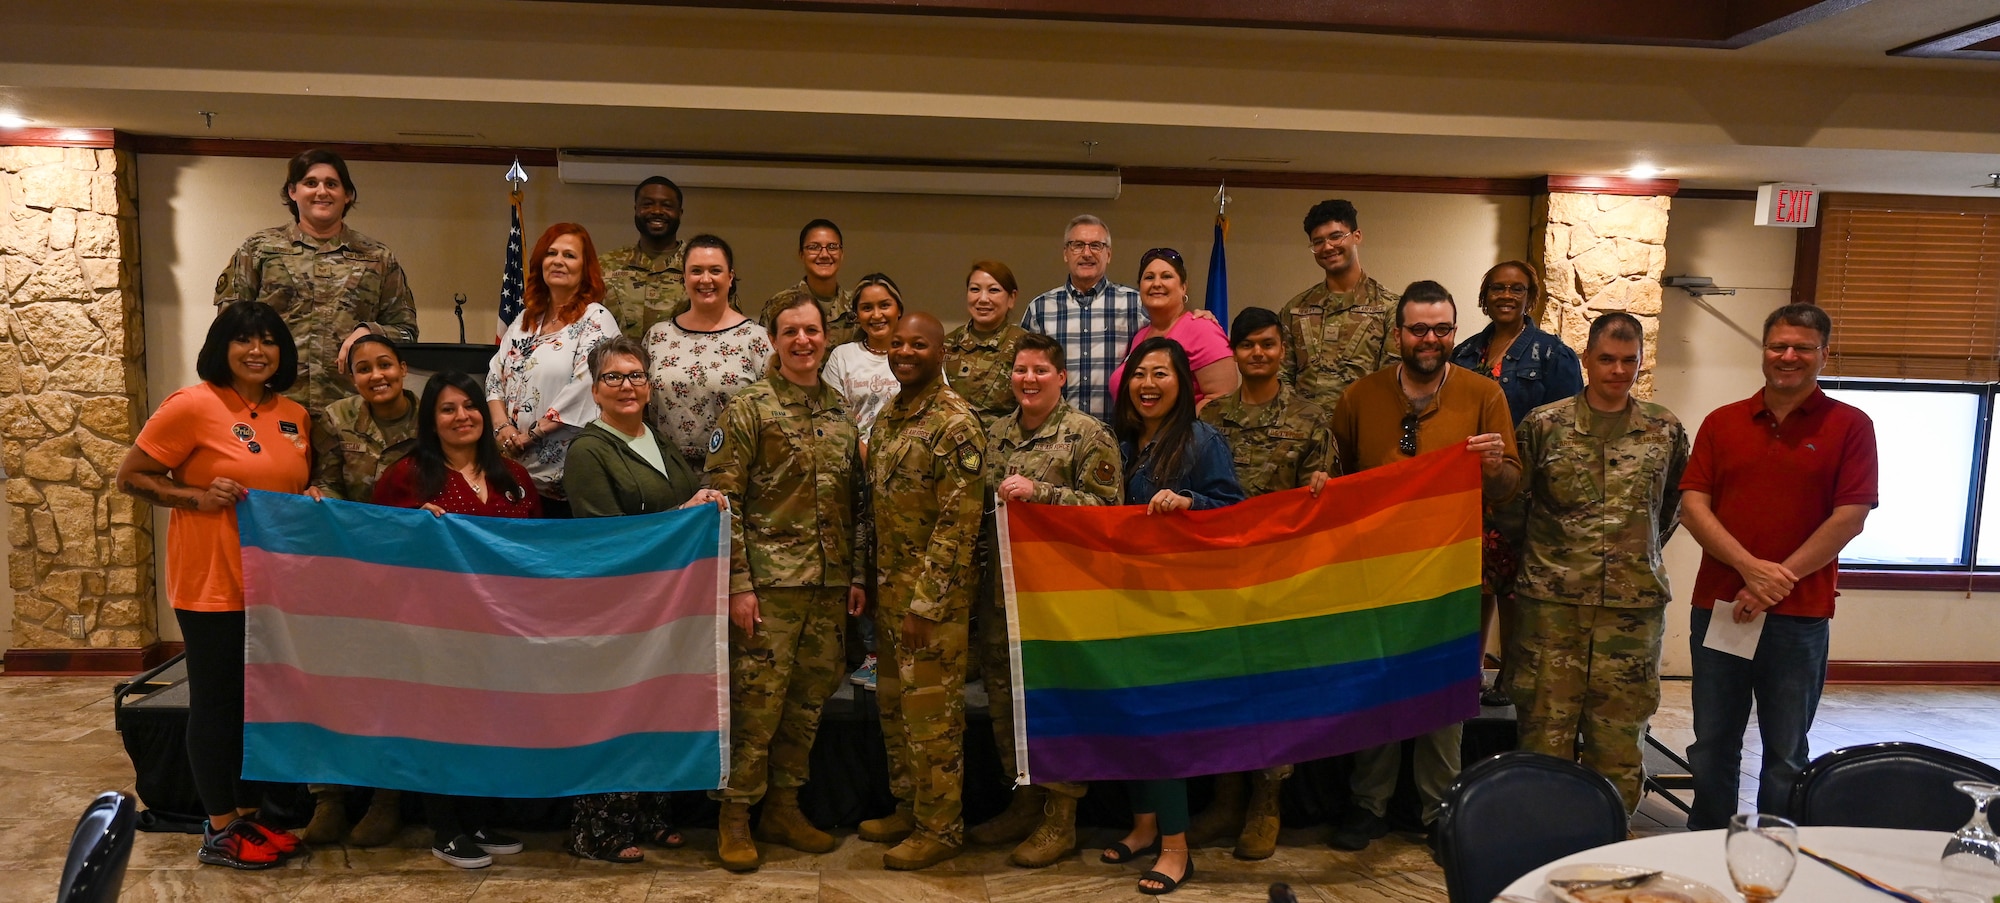 Members of the Altus Air Force Base LGBTQ+, Allies Pride Team, and 97th Air Mobility Wing leadership pose for a photo with U.S. Space Force Lt. Col. Bree Fram, astronautical engineer, during a Pride Month event held on base, June 5, 2023. Currently, 6.1% of military service members identify as LGBTQ+. (U.S. Air Force photo by Airman 1st Class Heidi Bucins).